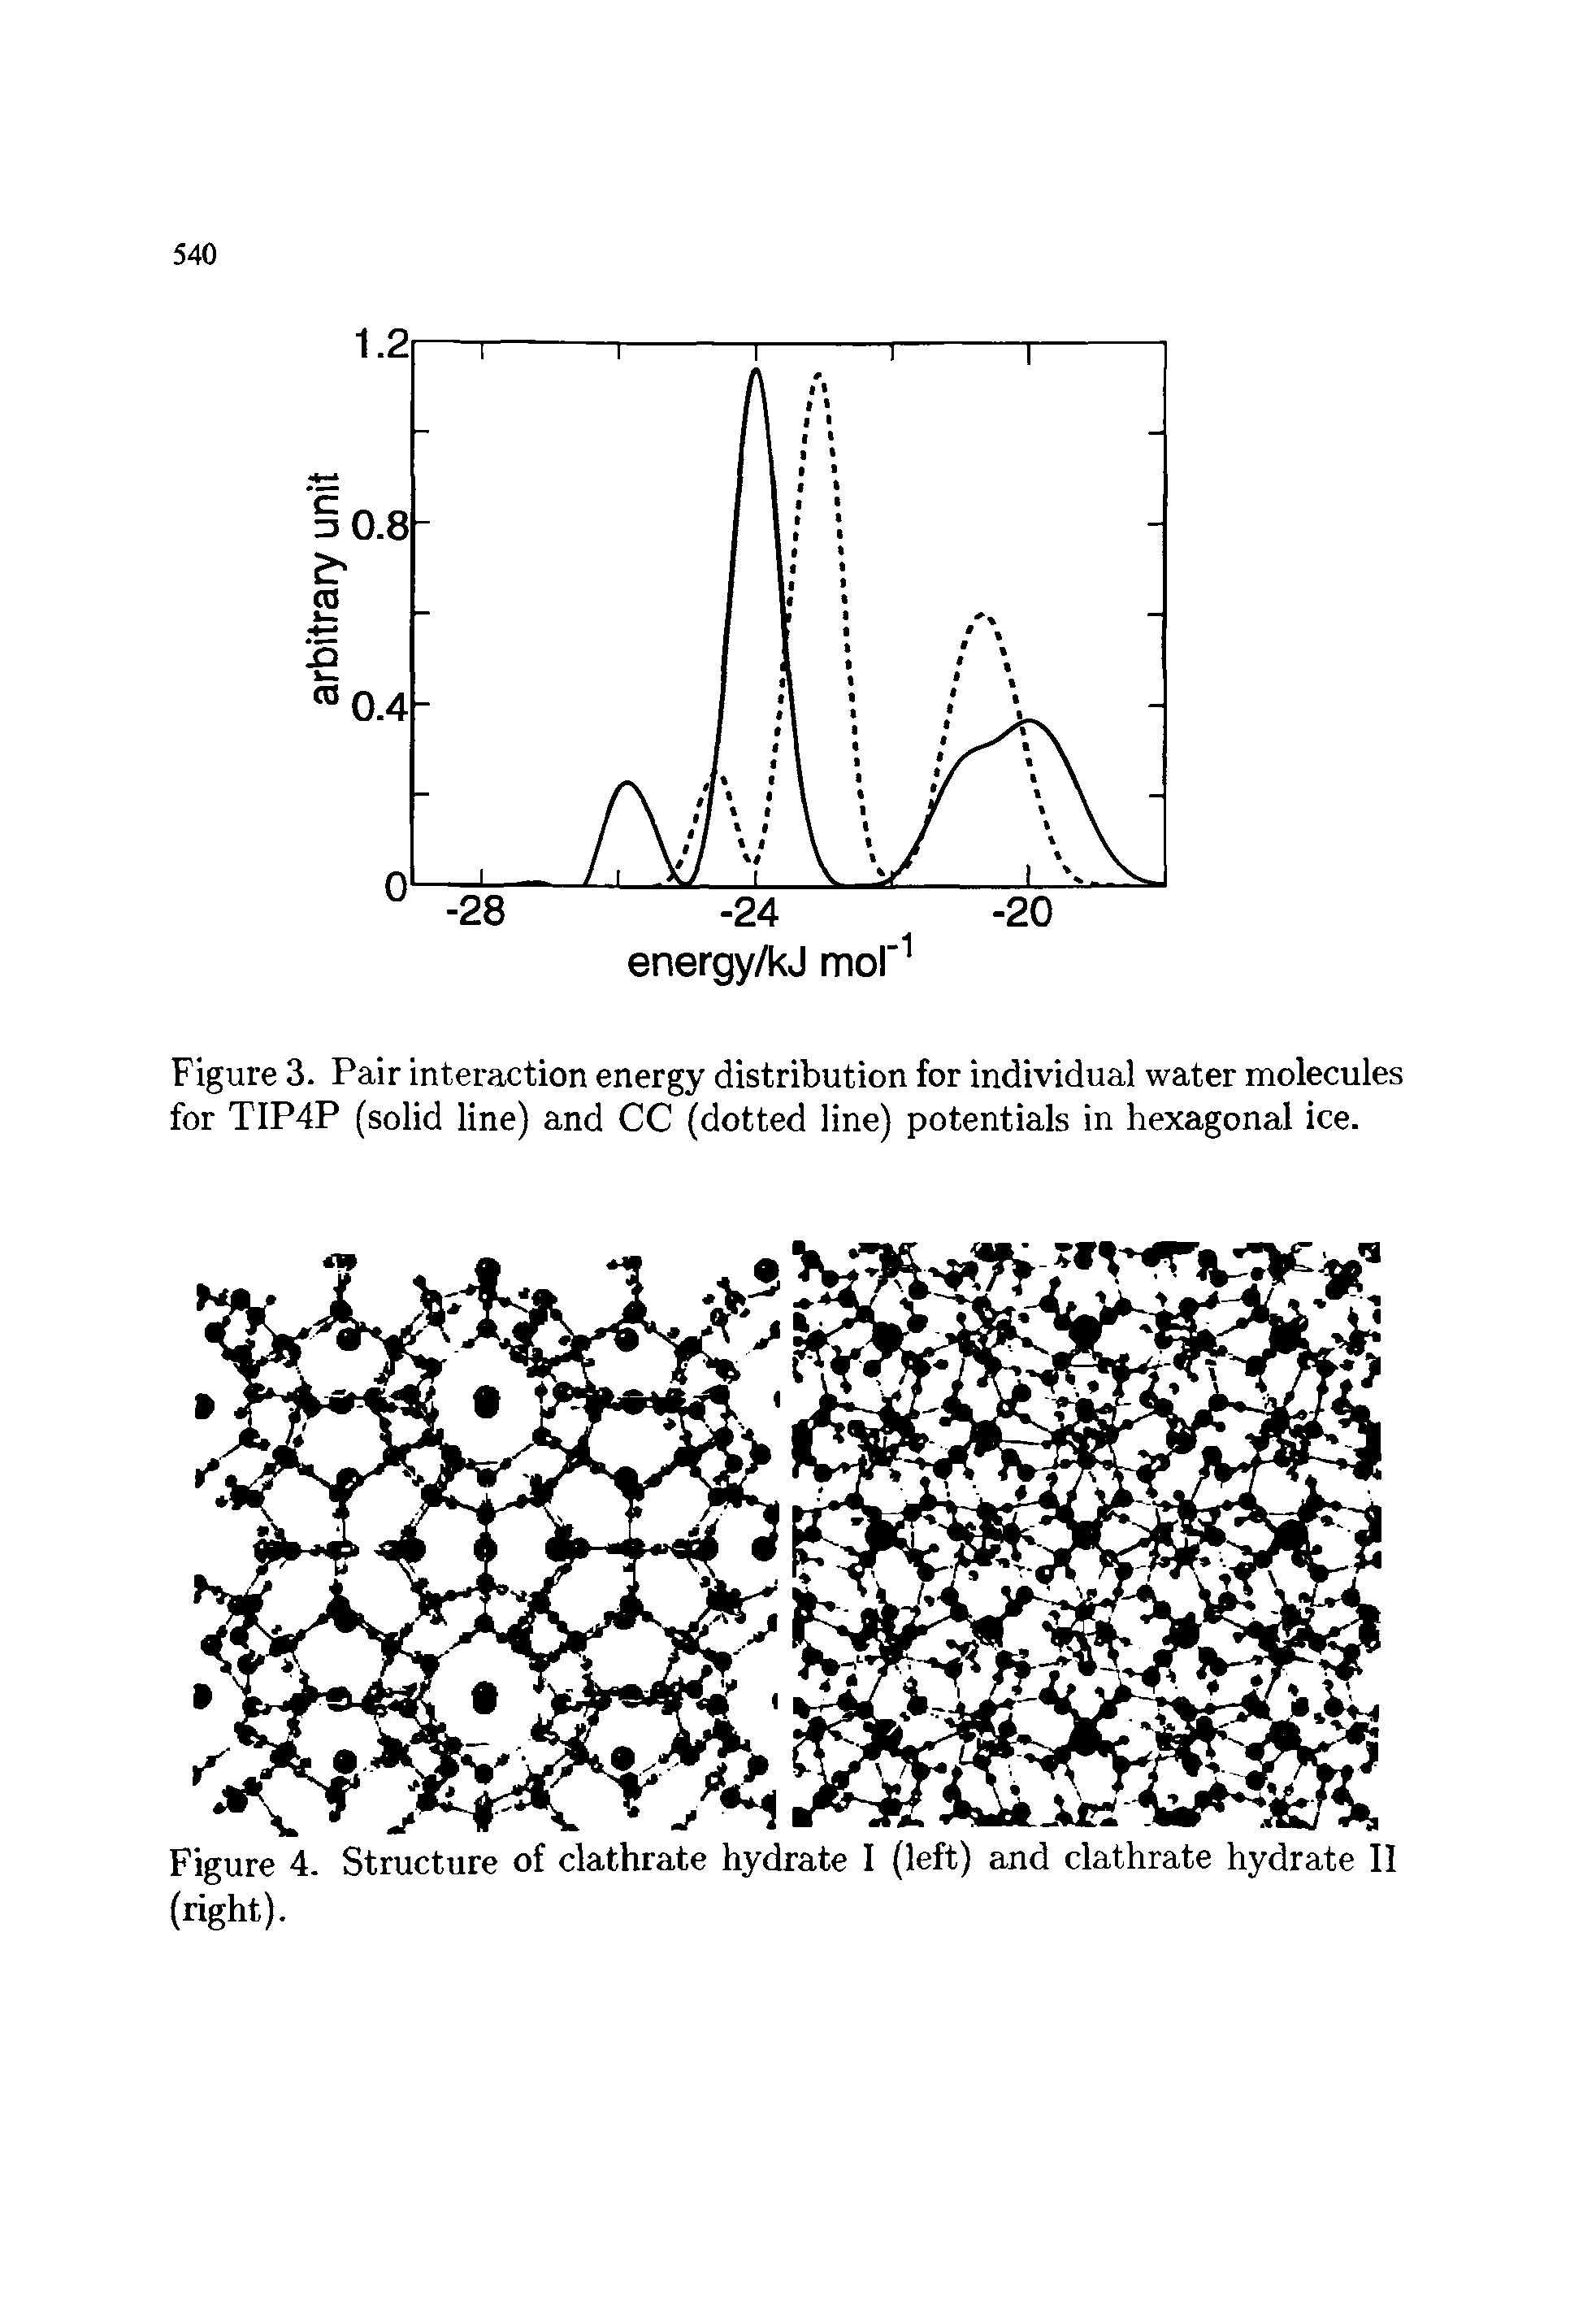 Figure 3. Pair interaction energy distribution for individual water molecules for TIP4P (solid line) and CC (dotted line) potentials in hexagonal ice.